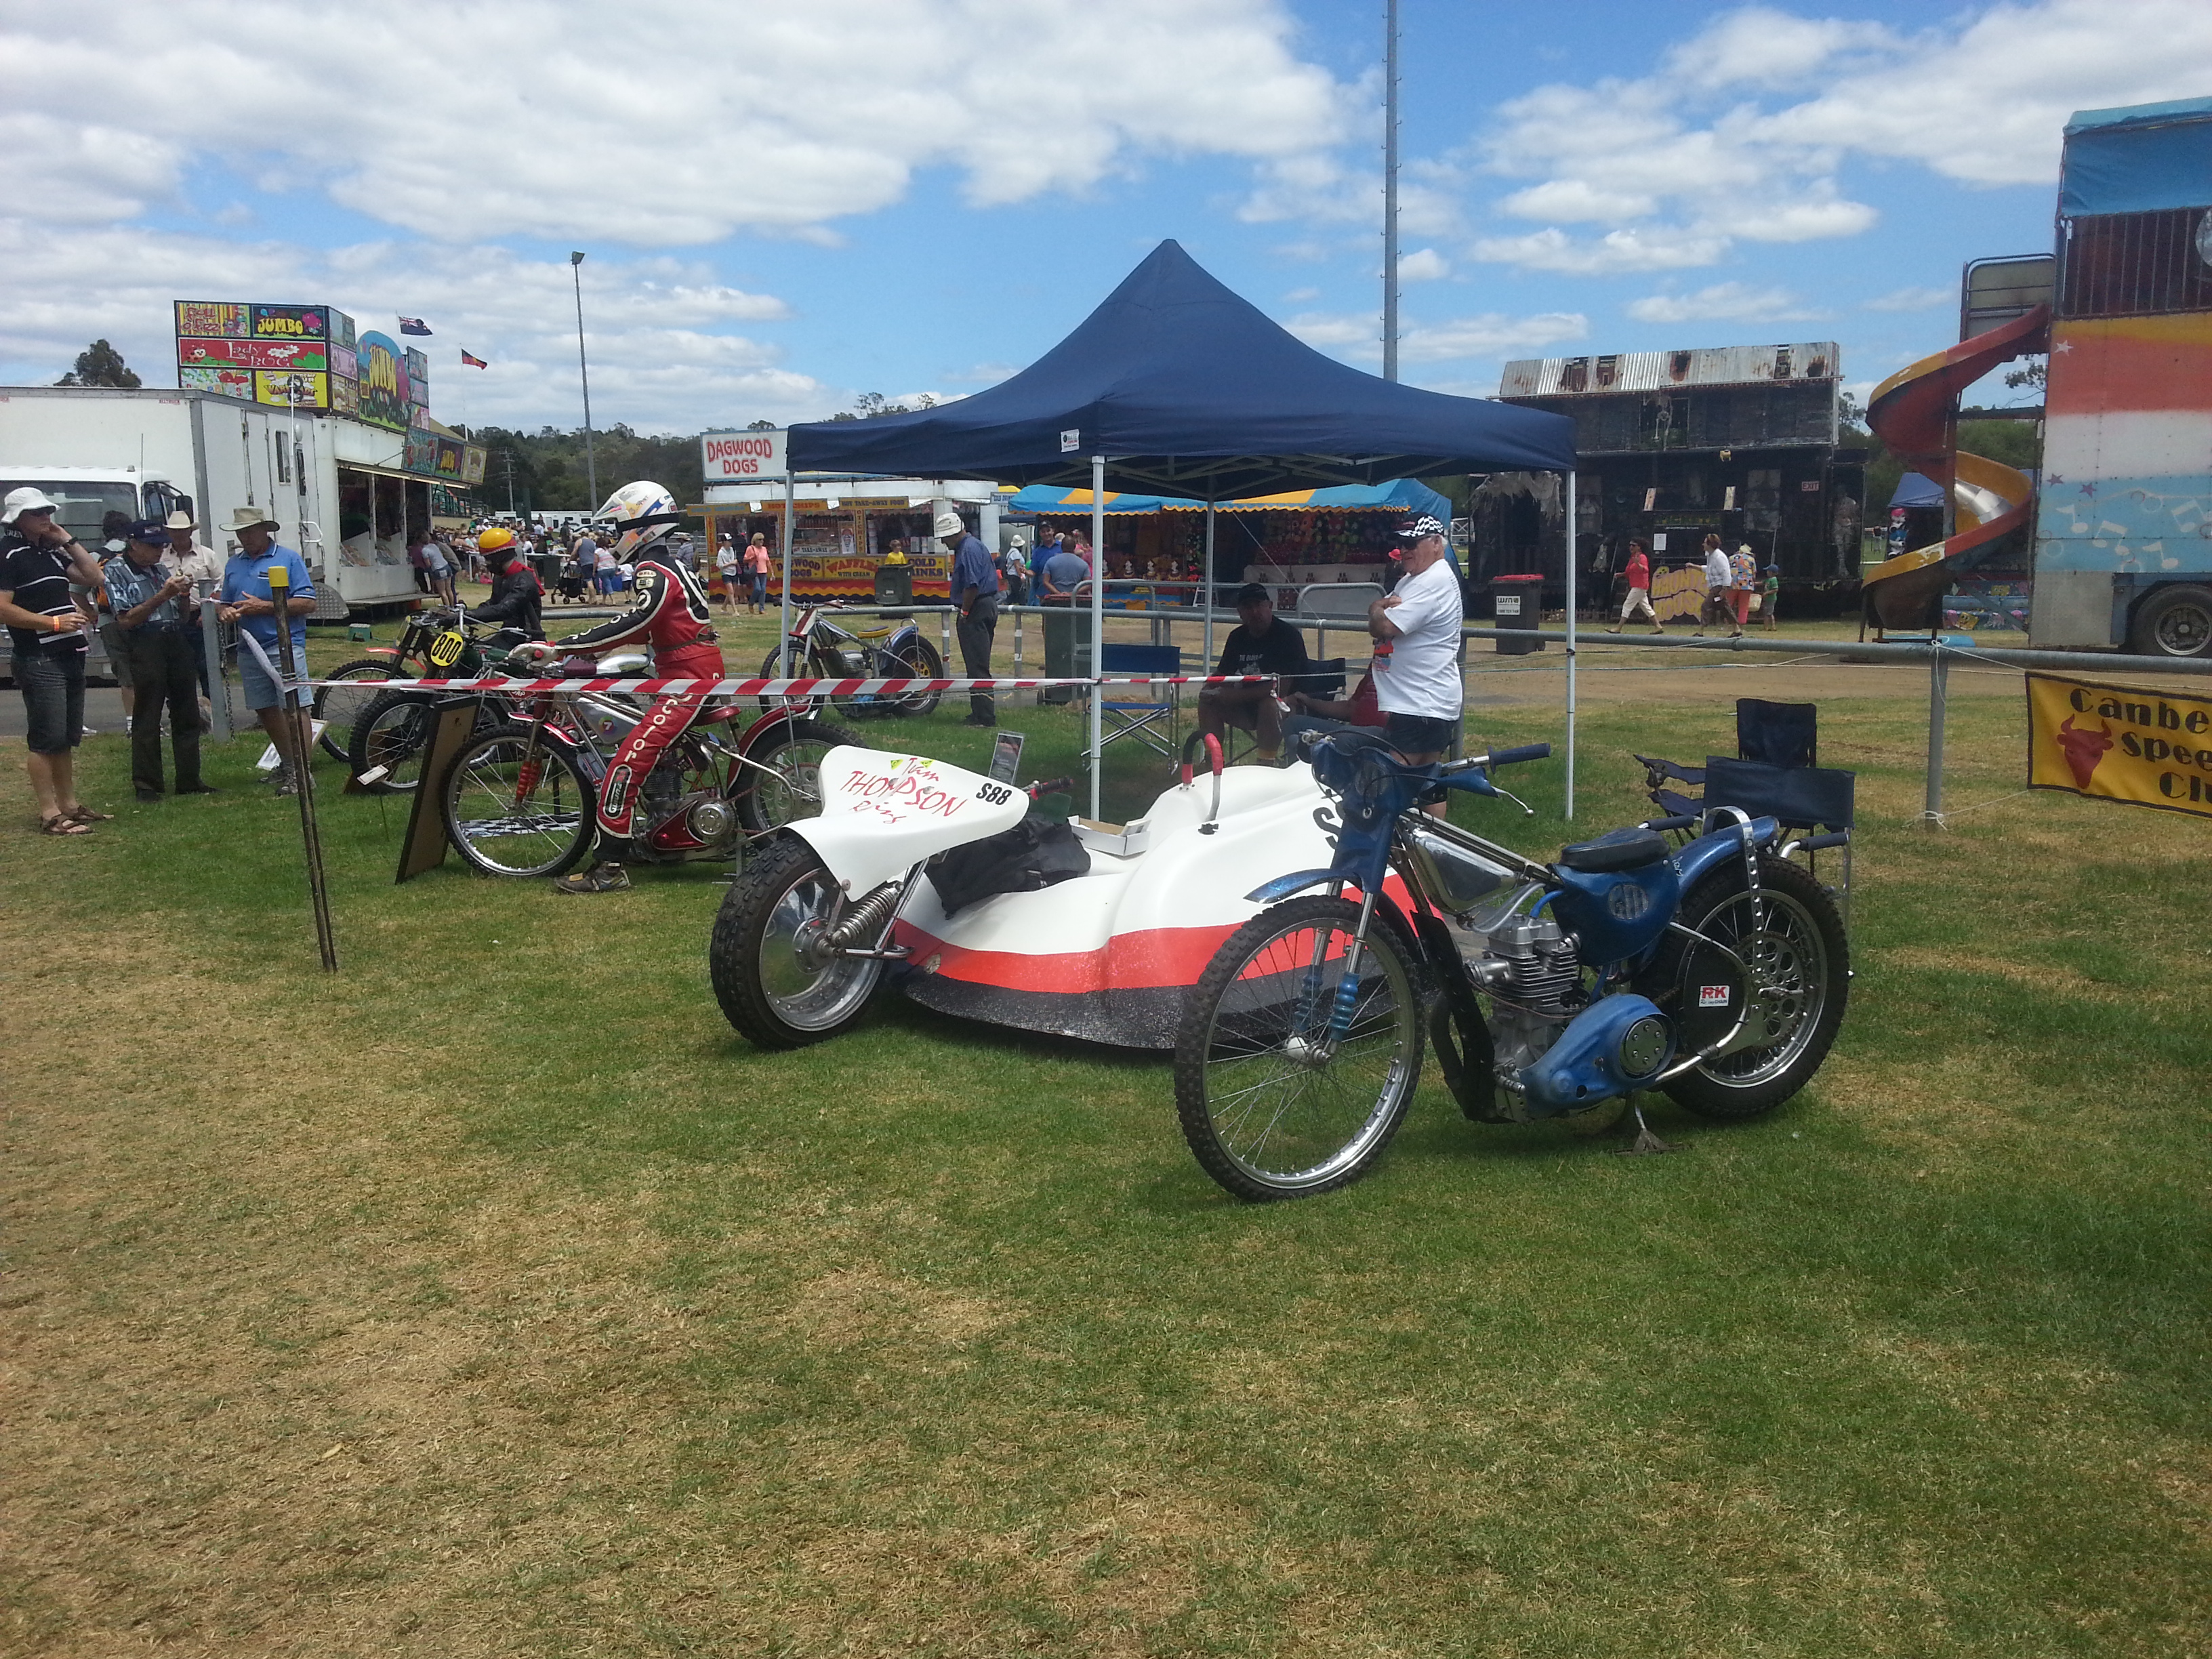 Our speedway sidecar at the 2014 Moruya Show